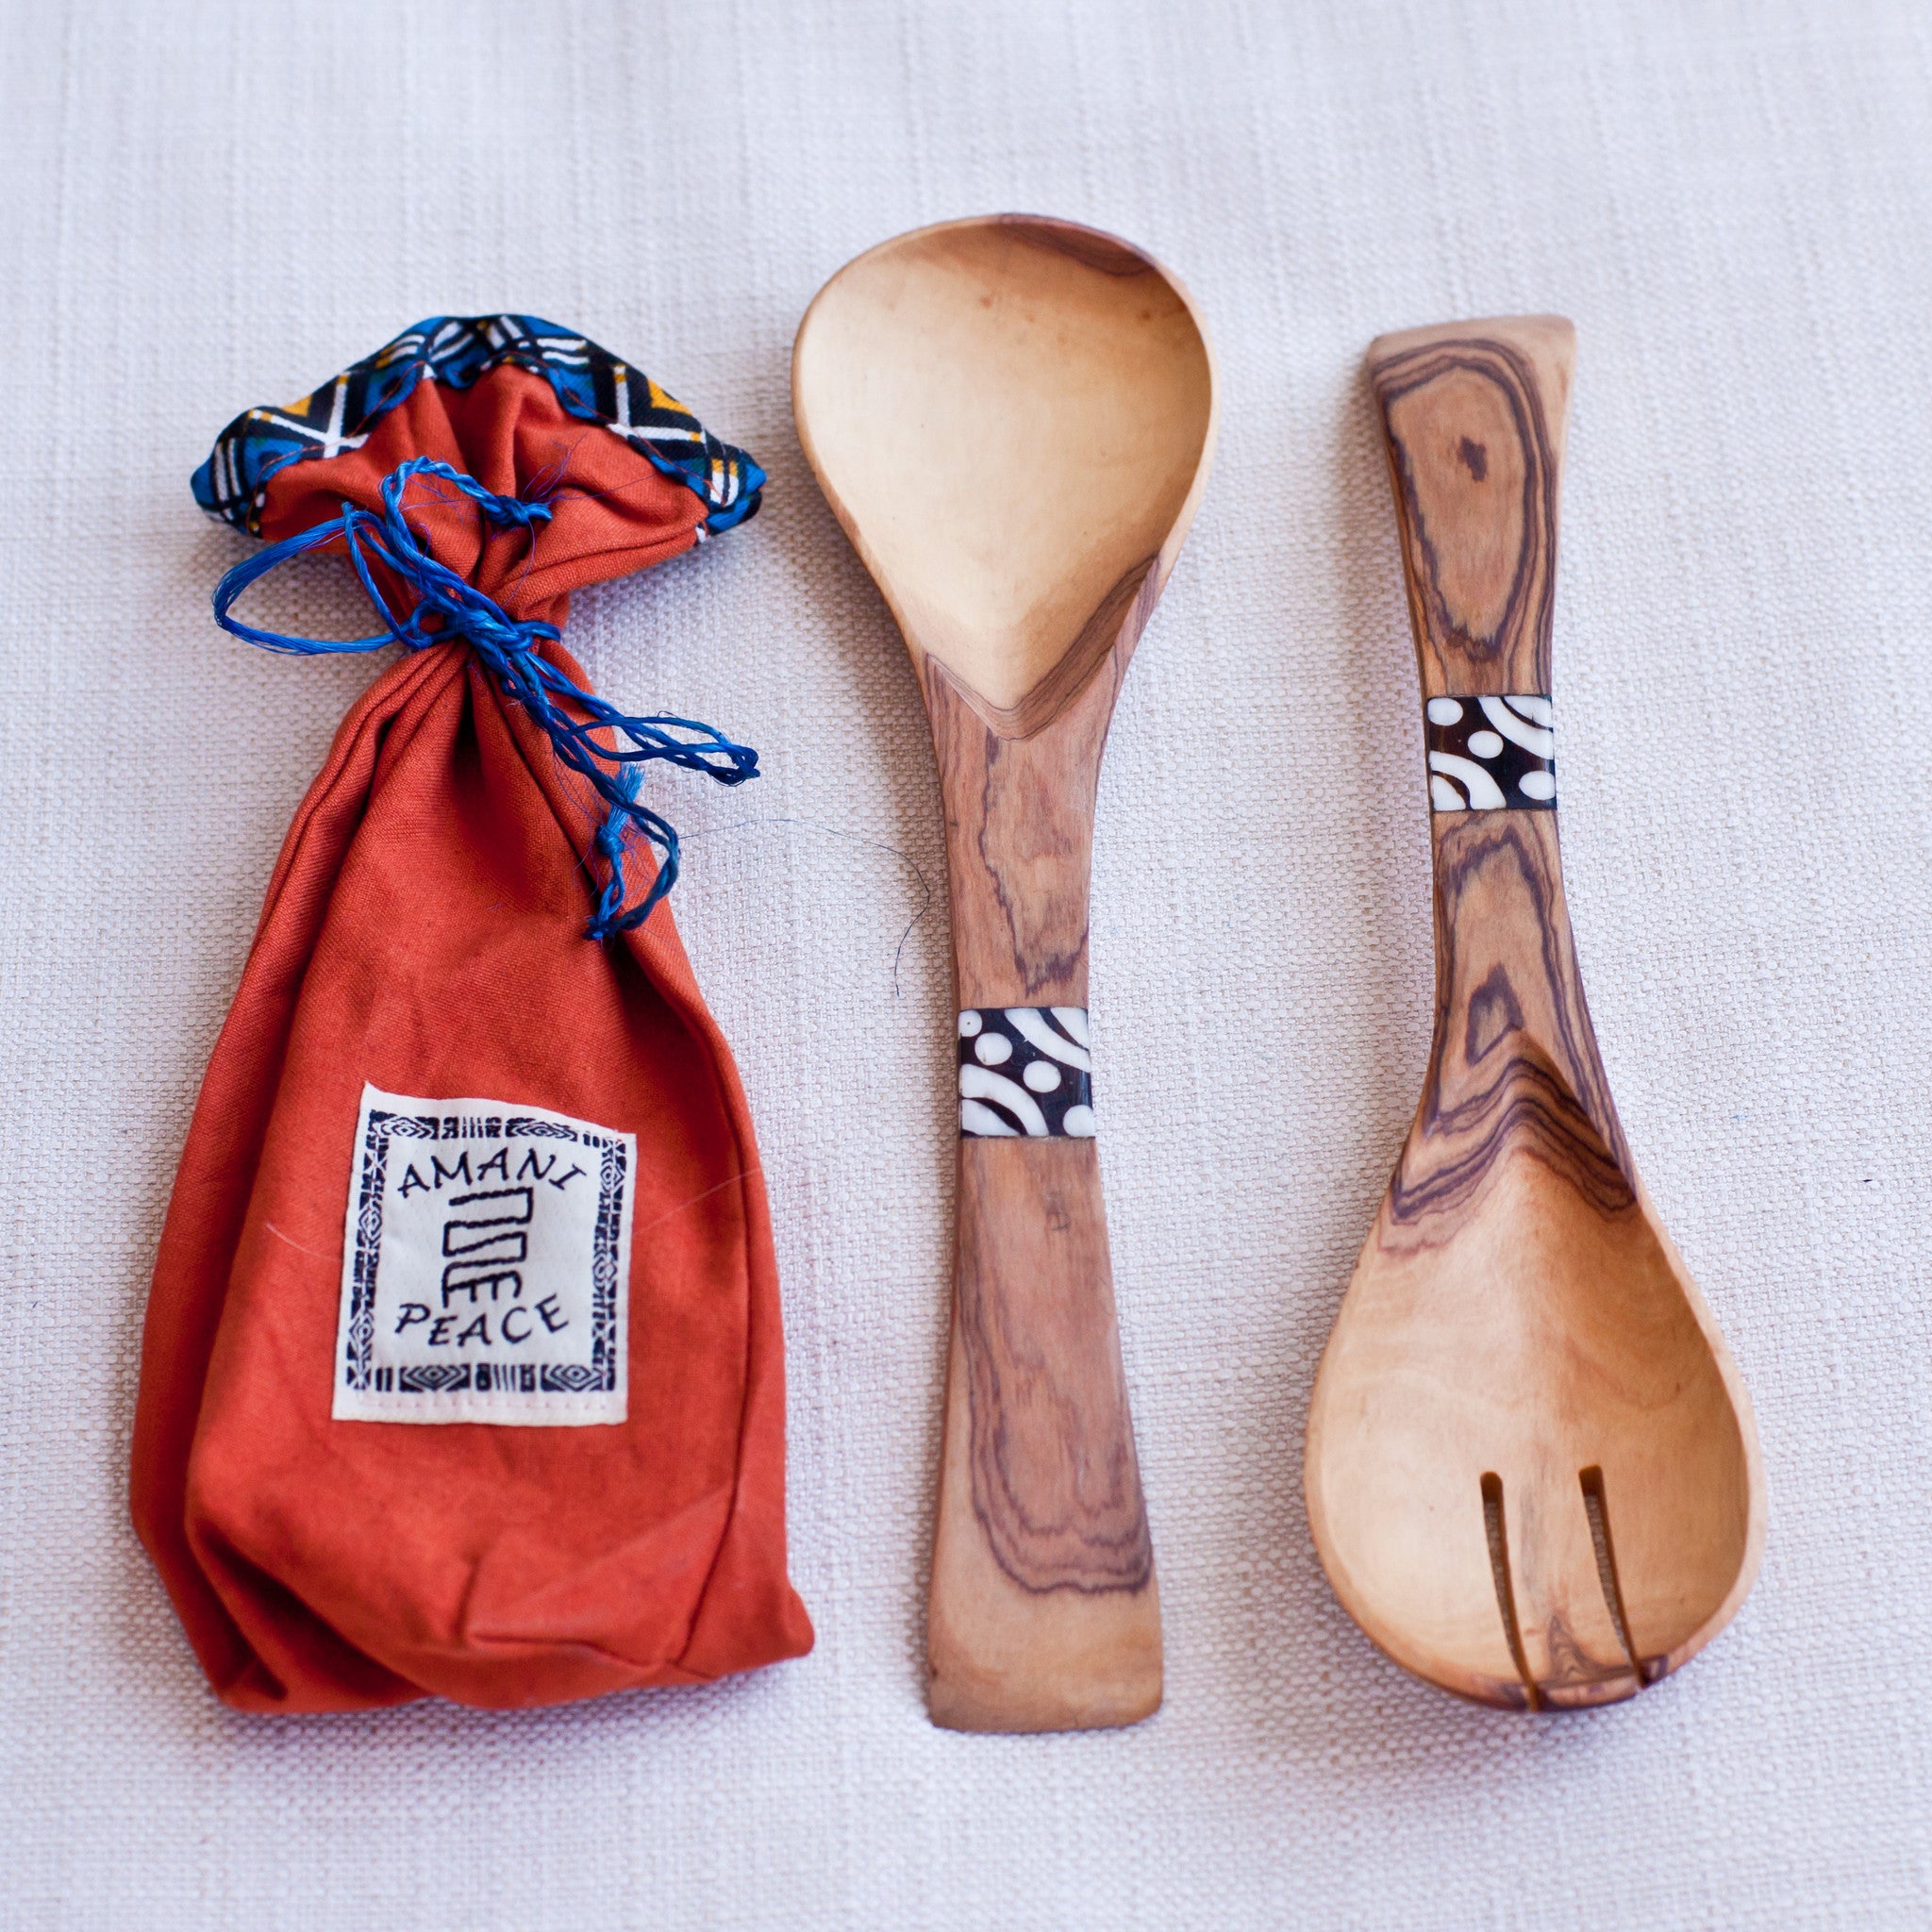 Olivewood & Bone Flat Spoon Set - Kenyan materials and design for a fair trade boutique